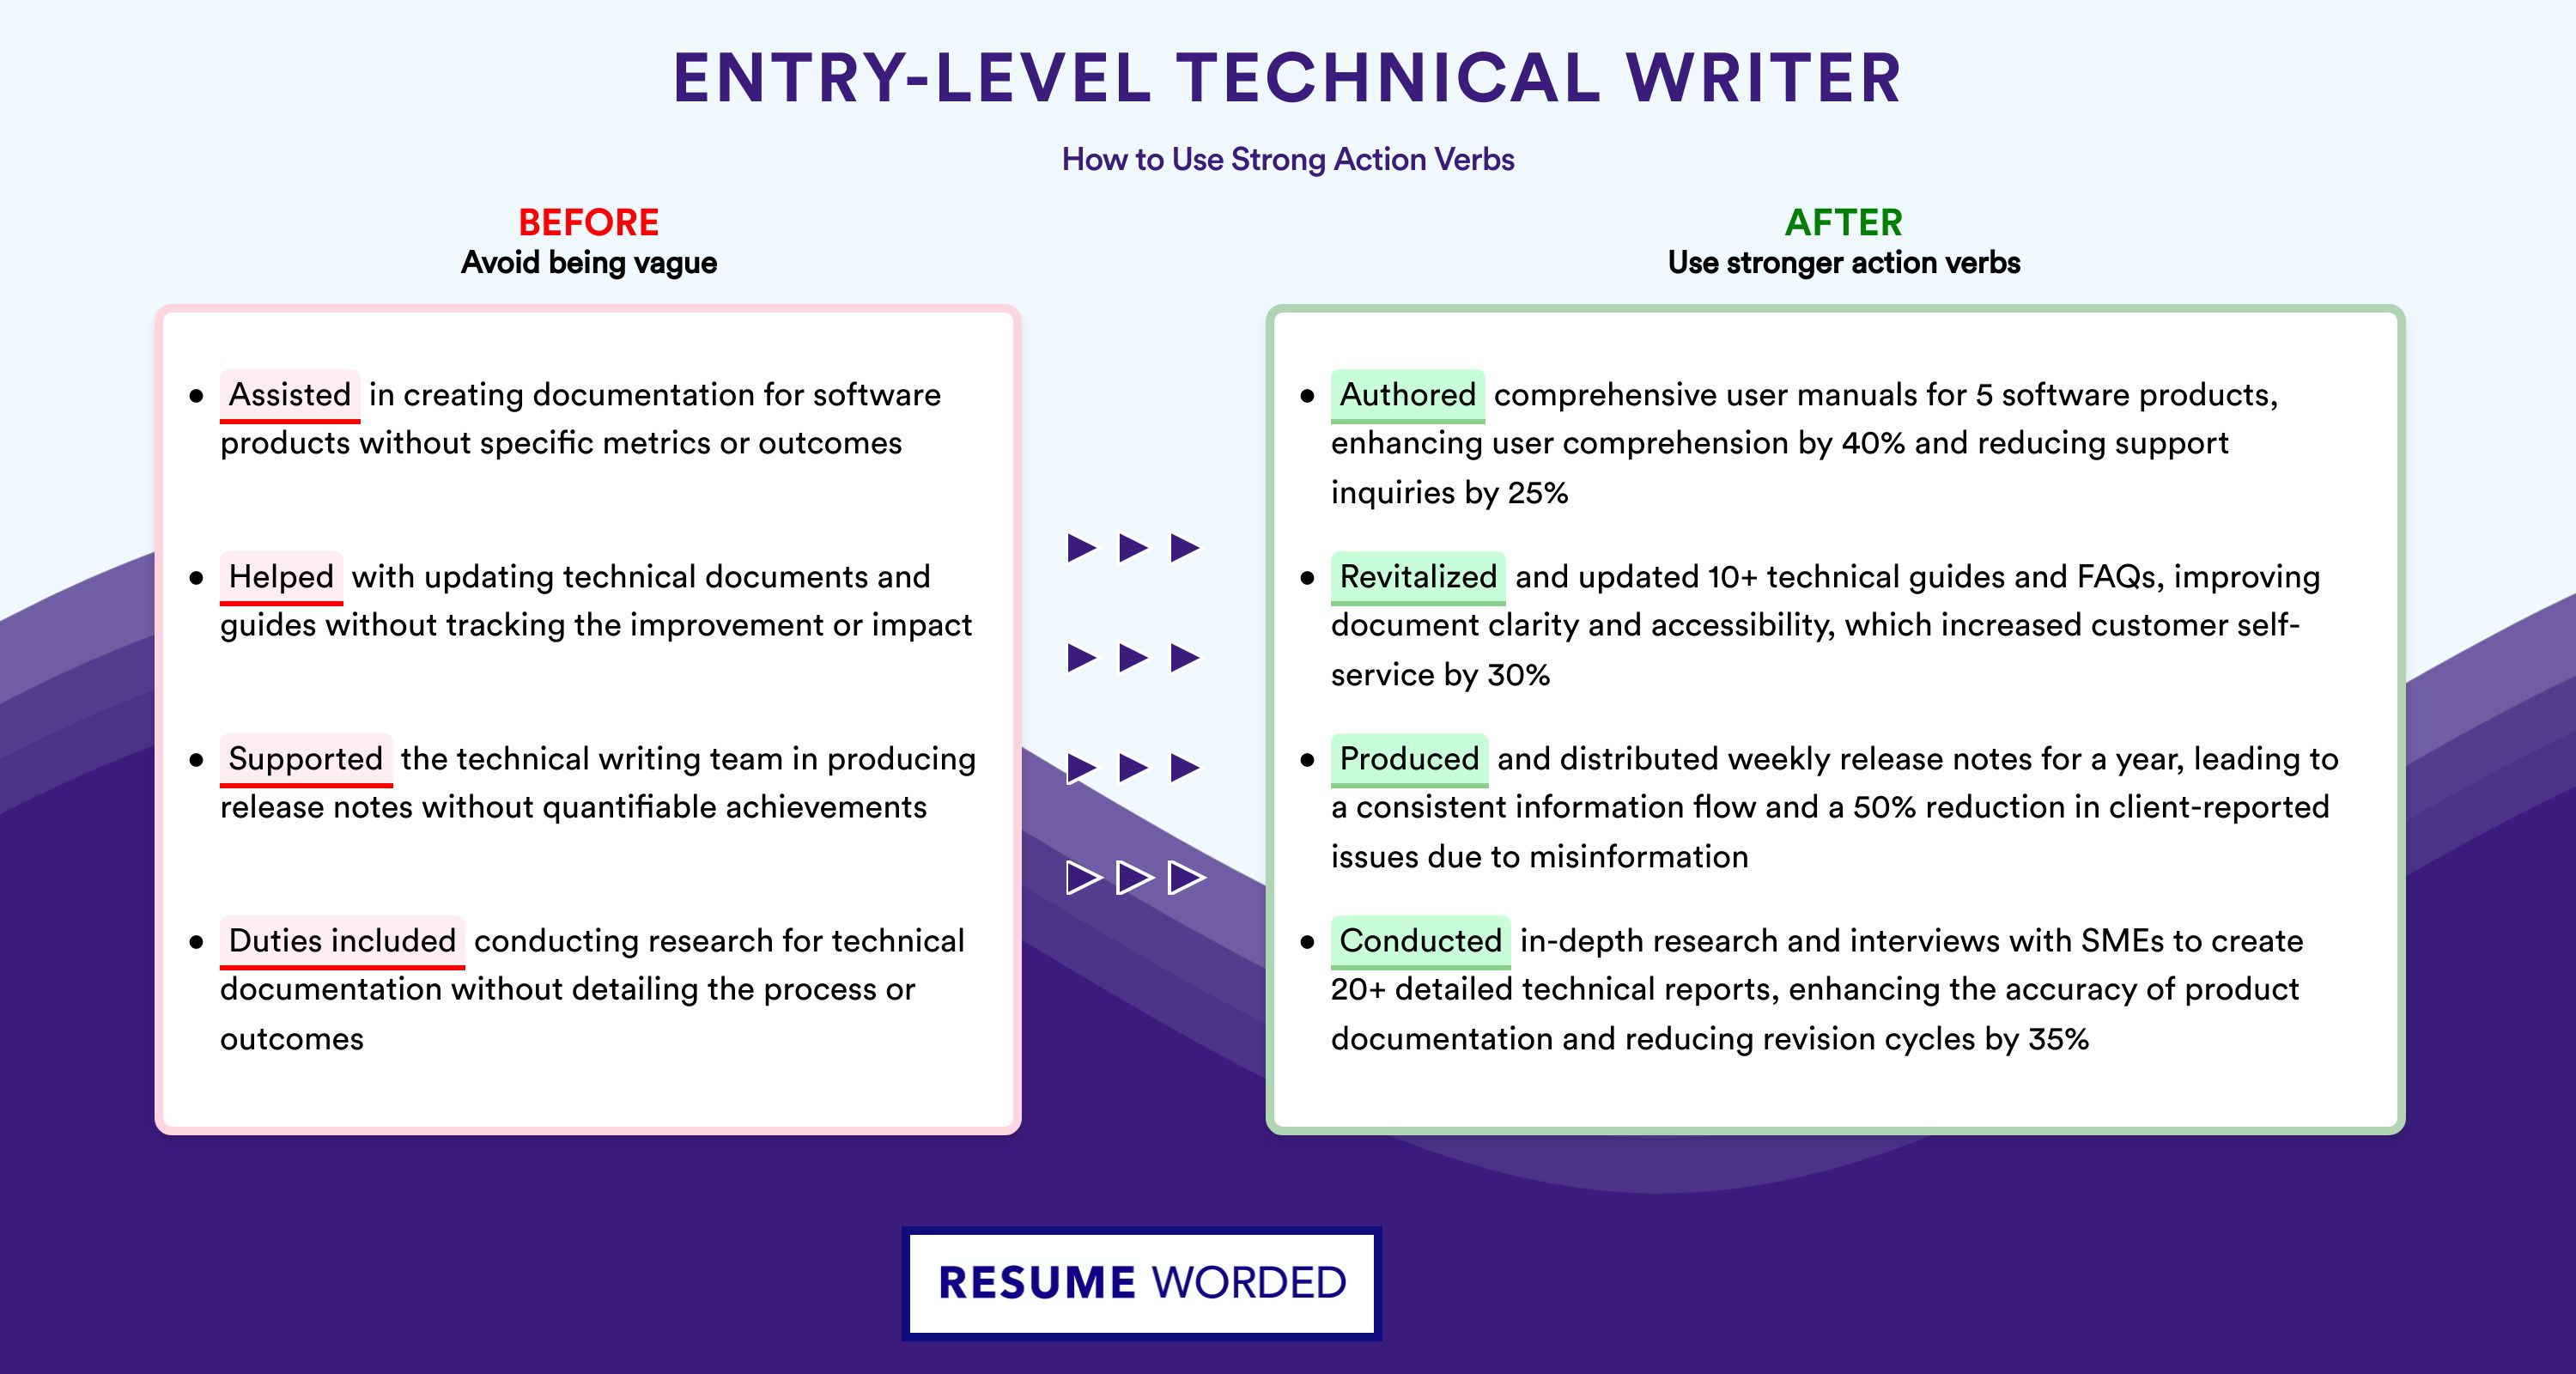 Action Verbs for Entry-Level Technical Writer